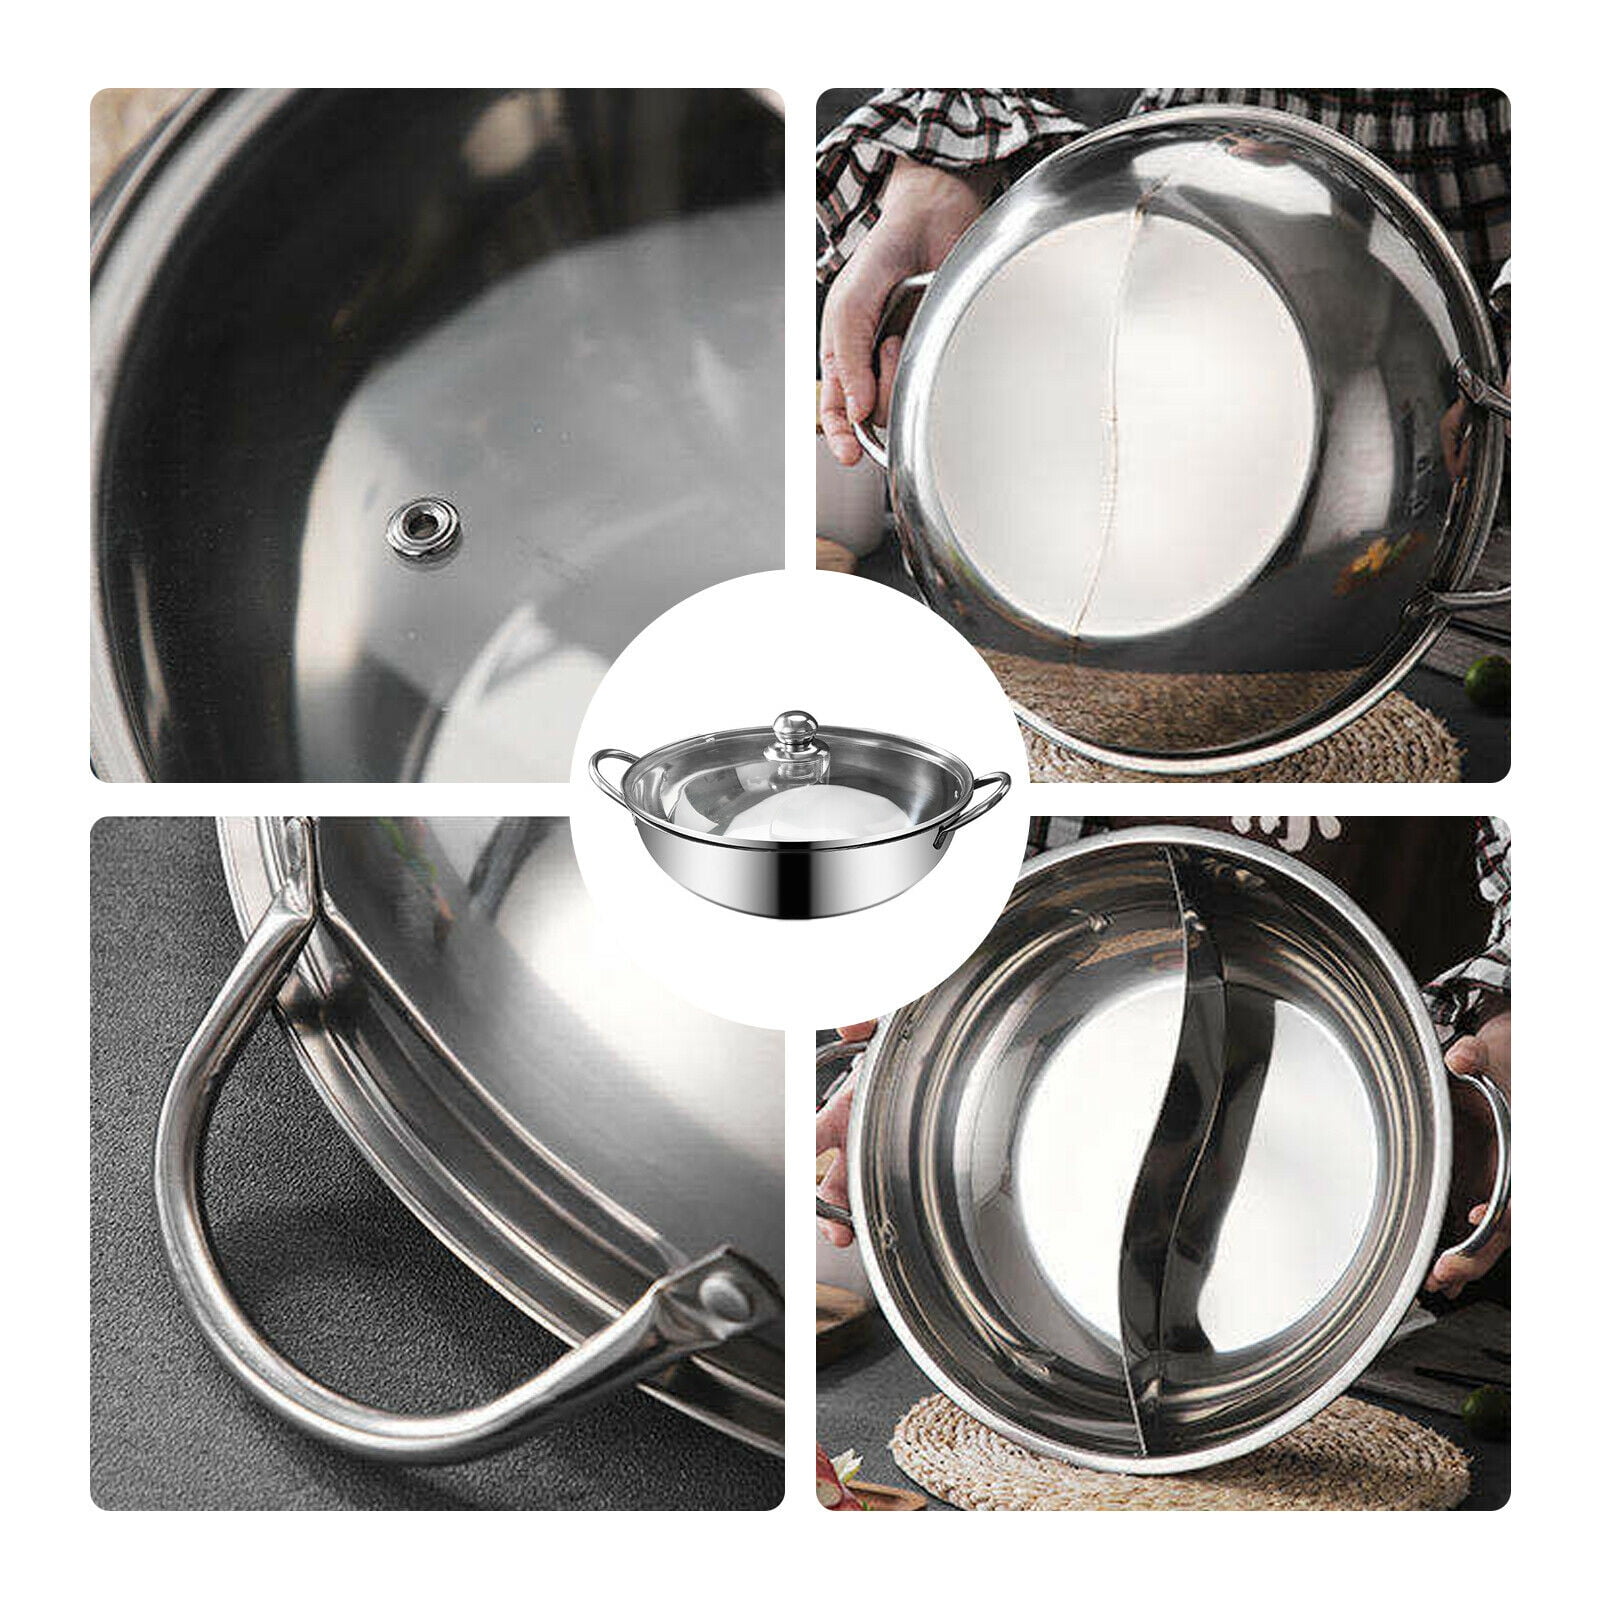 Stainless Steel Shabu Shabu Dual Site Divider Cooking Soup Hot Pot w/ Lid 12 inch, Size: NA, Silver